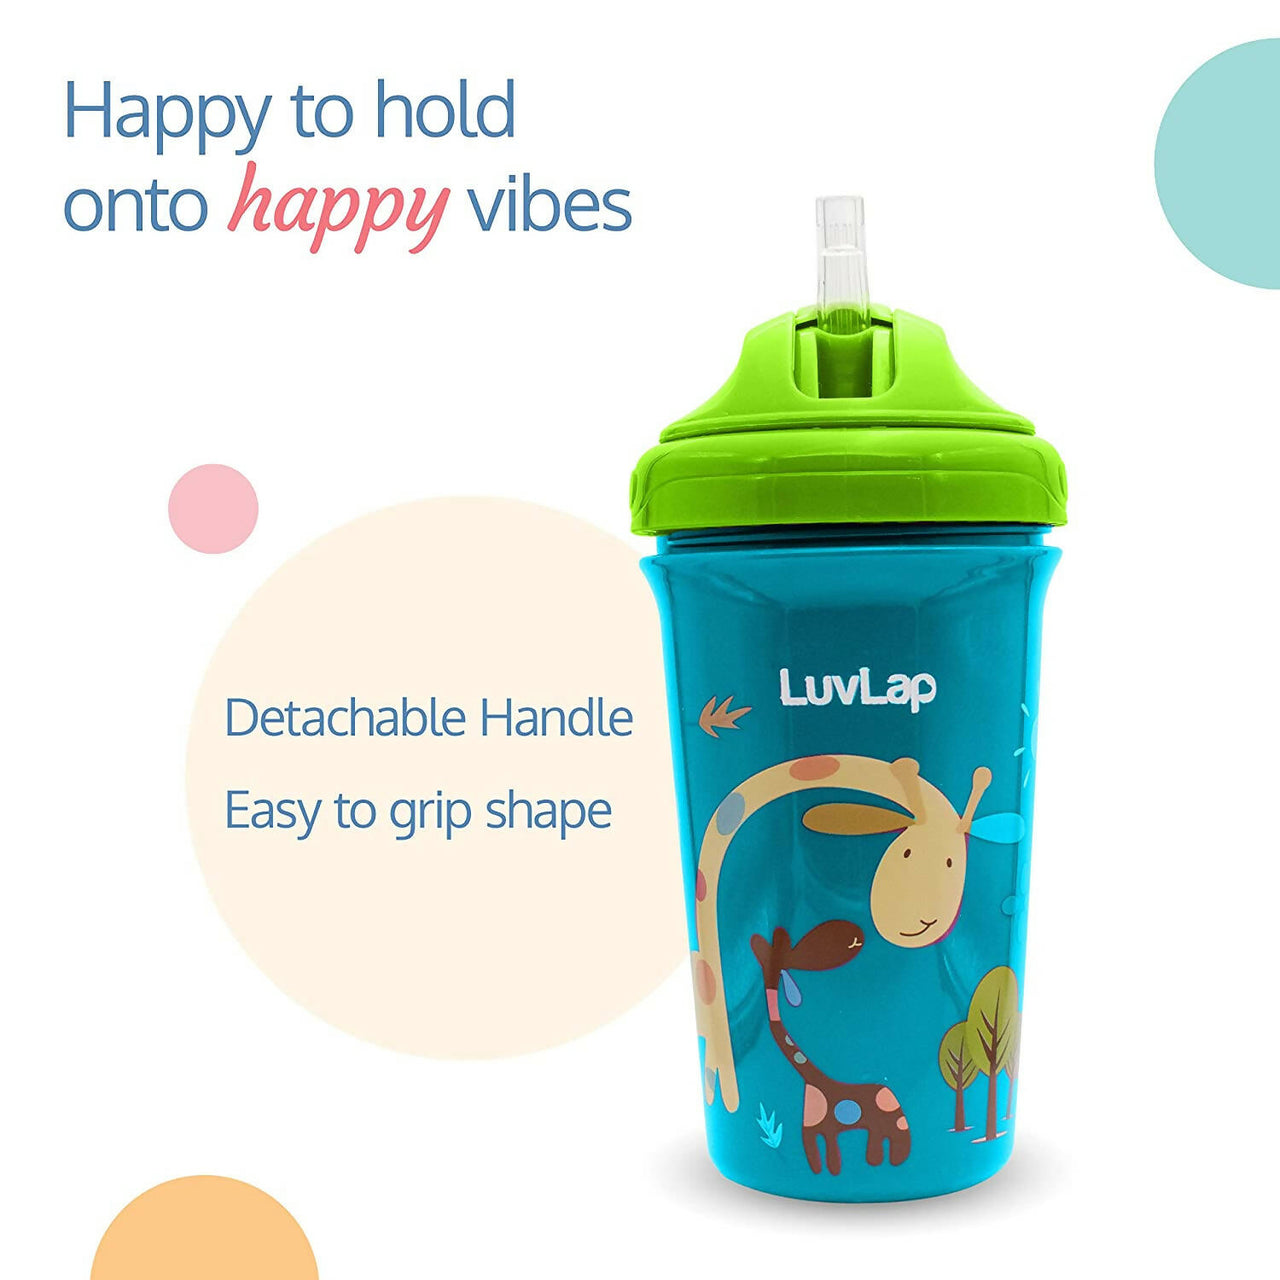 LuvLap Tiny Giffy Sipper for Infant/Toddler - Distacart